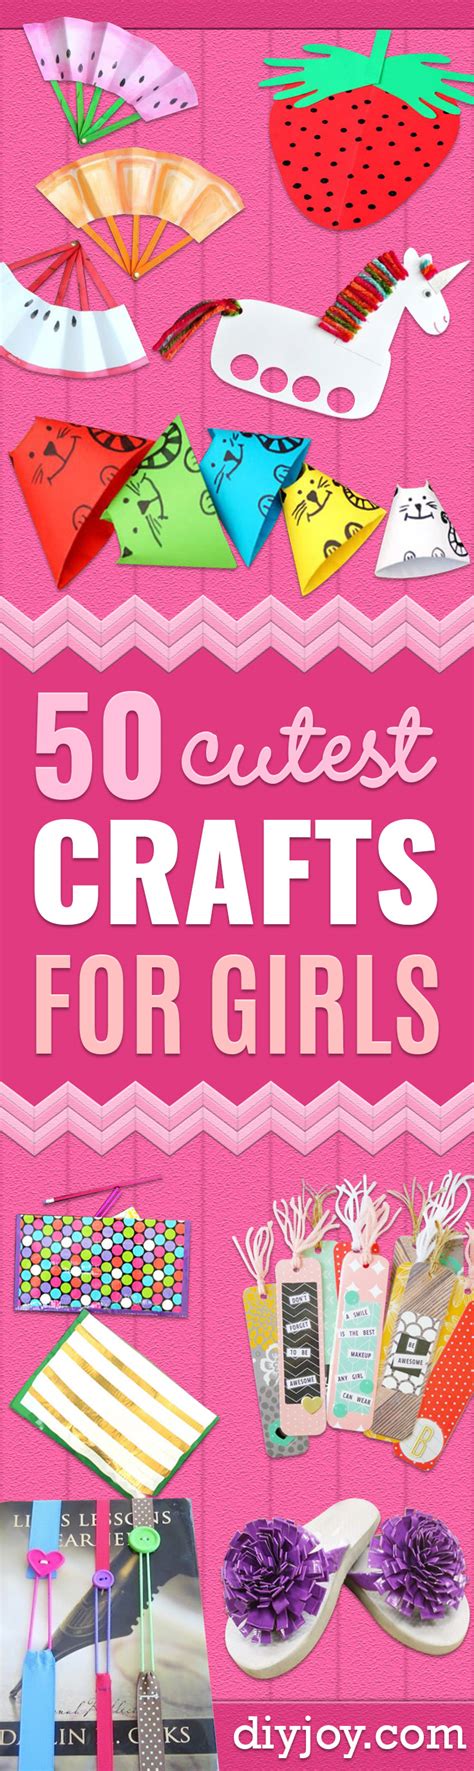 50 Cutest Crafts For Girls To Make